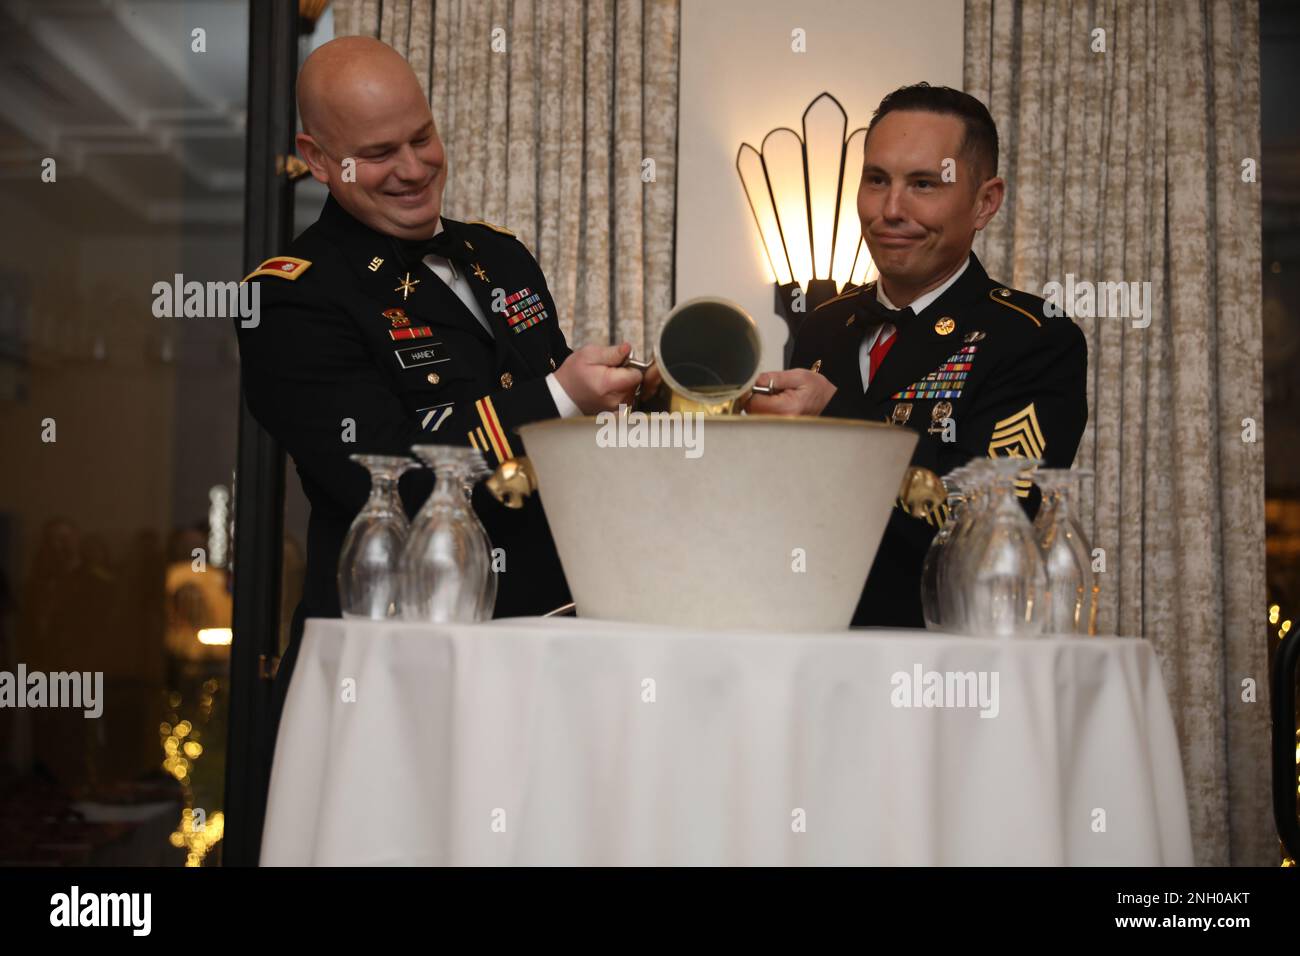 The 108th Air Defense Artillery Brigade command team contributes a charge to the ceremonial grog during the Saint Barbara's Social, December 3rd at the Plaza Hotel in El Paso, Texas. Stock Photo